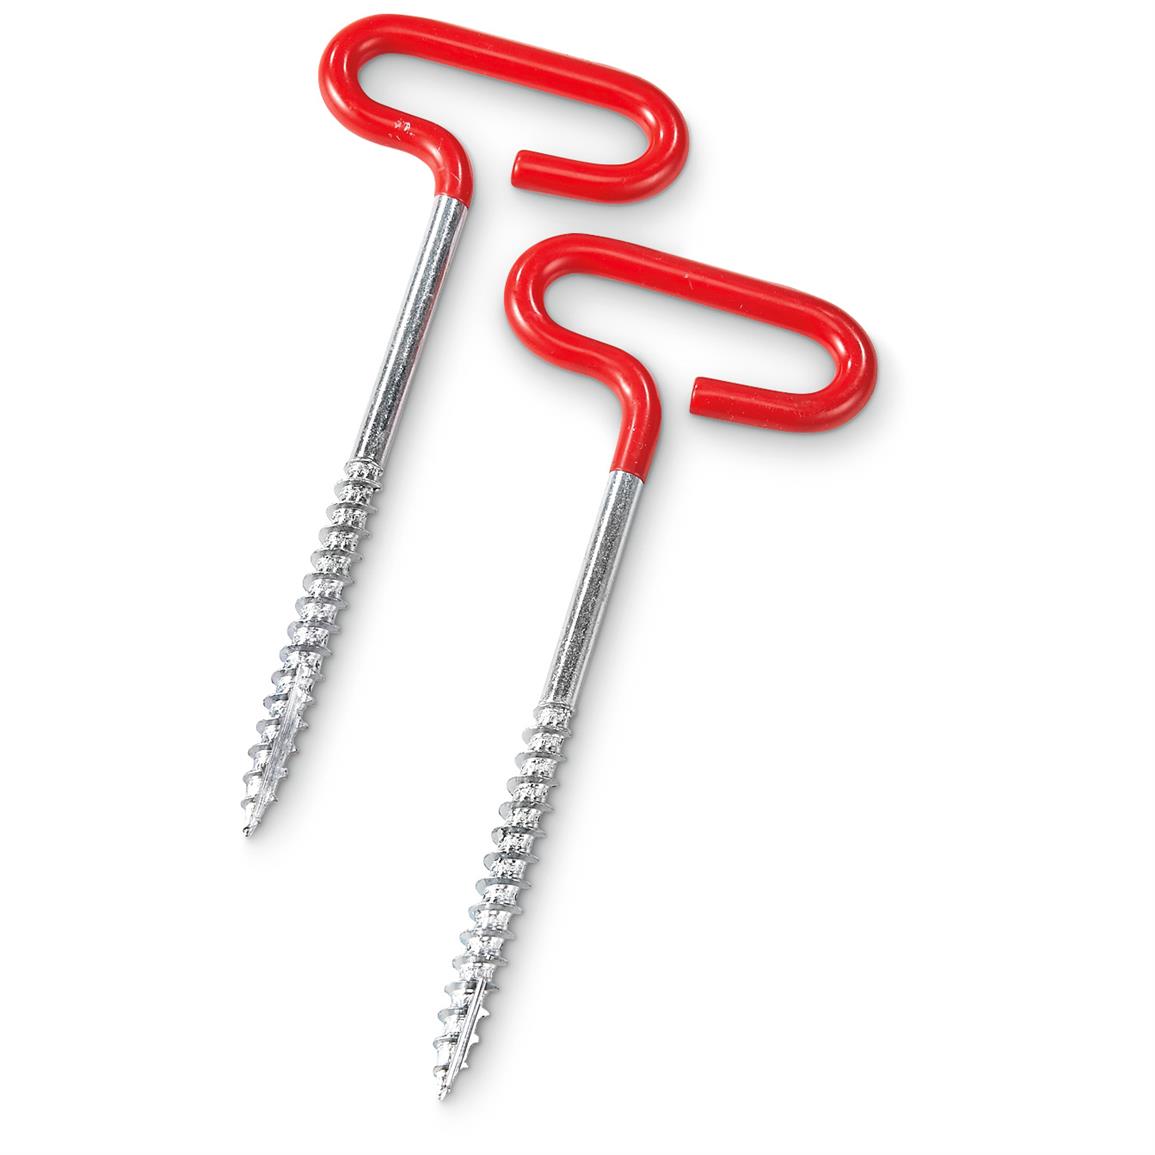 2-Pk. Shappell Ice Anchors